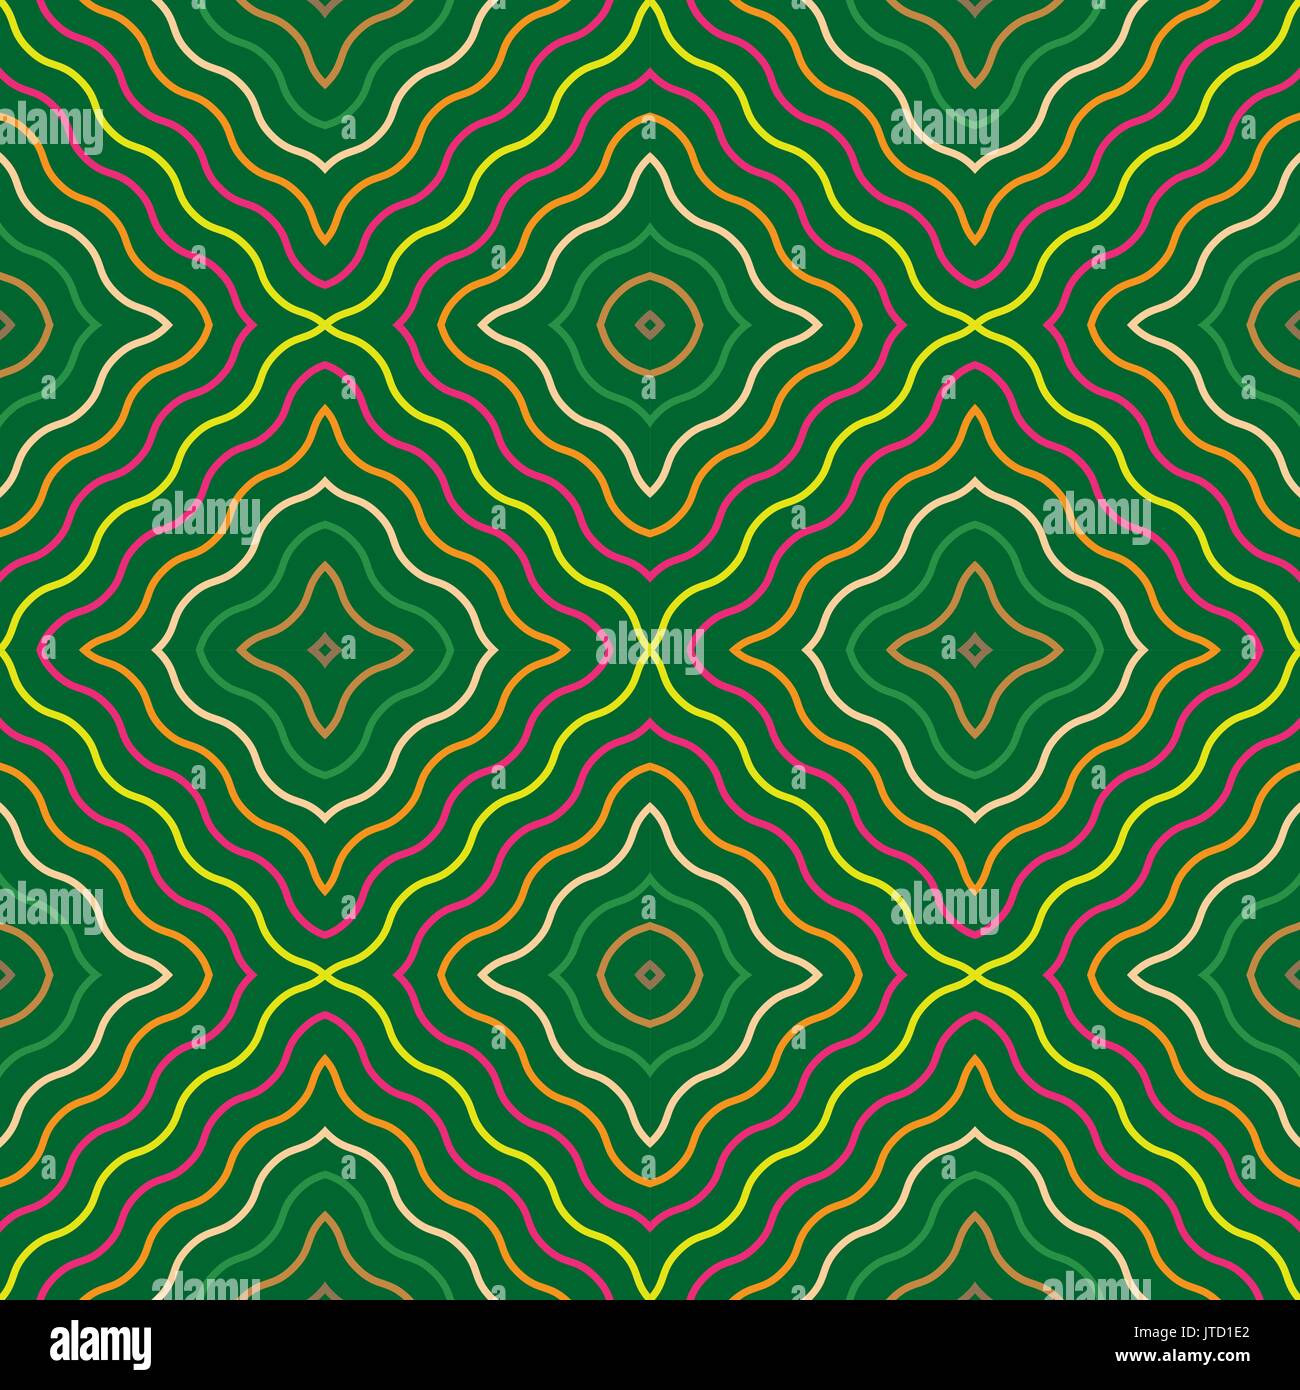 Seamless pattern with wavy lines. Endless texture with stylish quadrats on green background can use for textile, dress, blouse, shawl, dclothes. Stock Vector